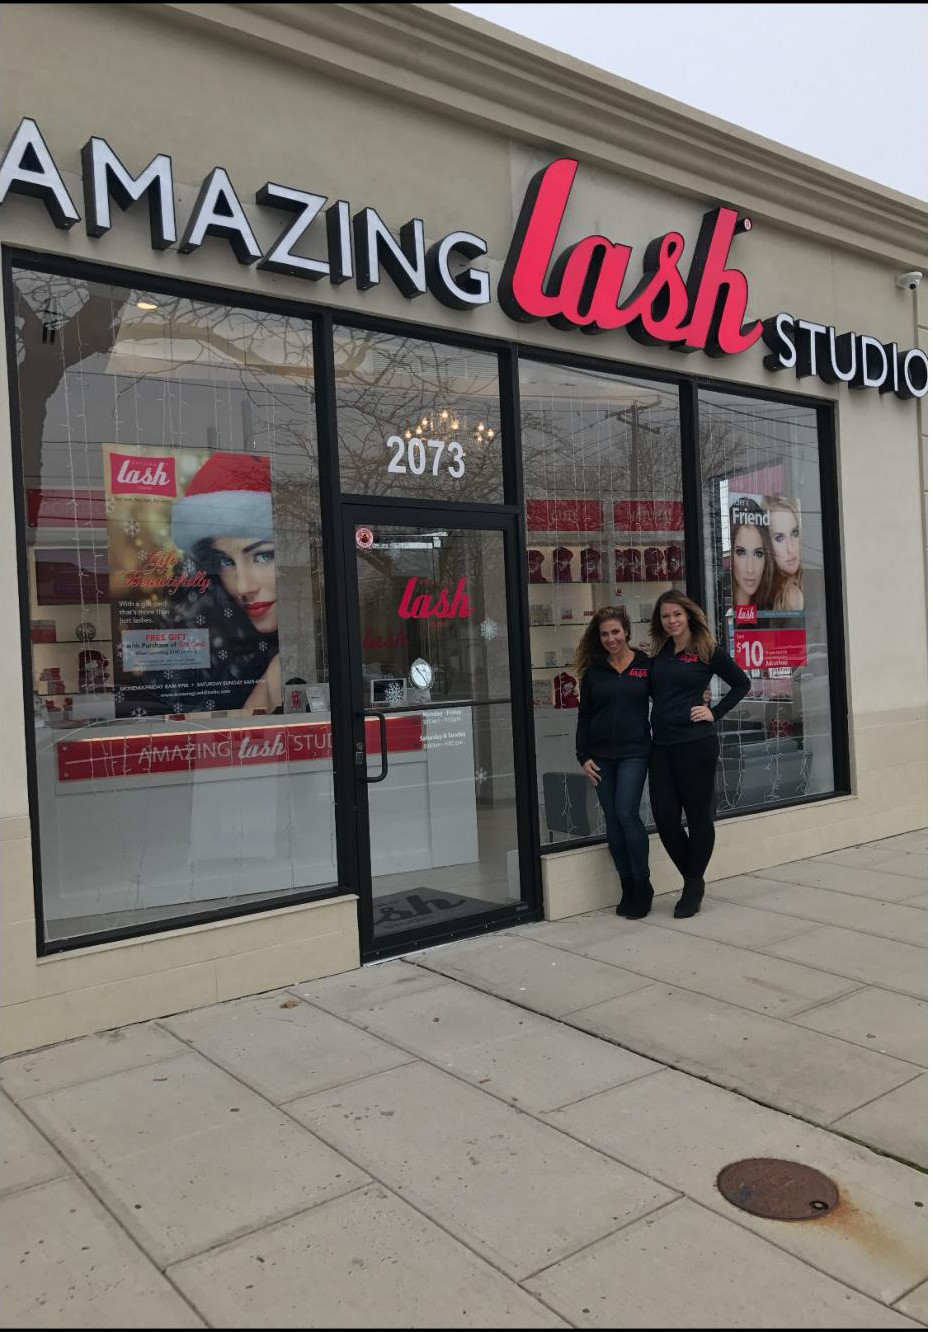 Amazing Lash Studio storefront with owner and manager posing by door